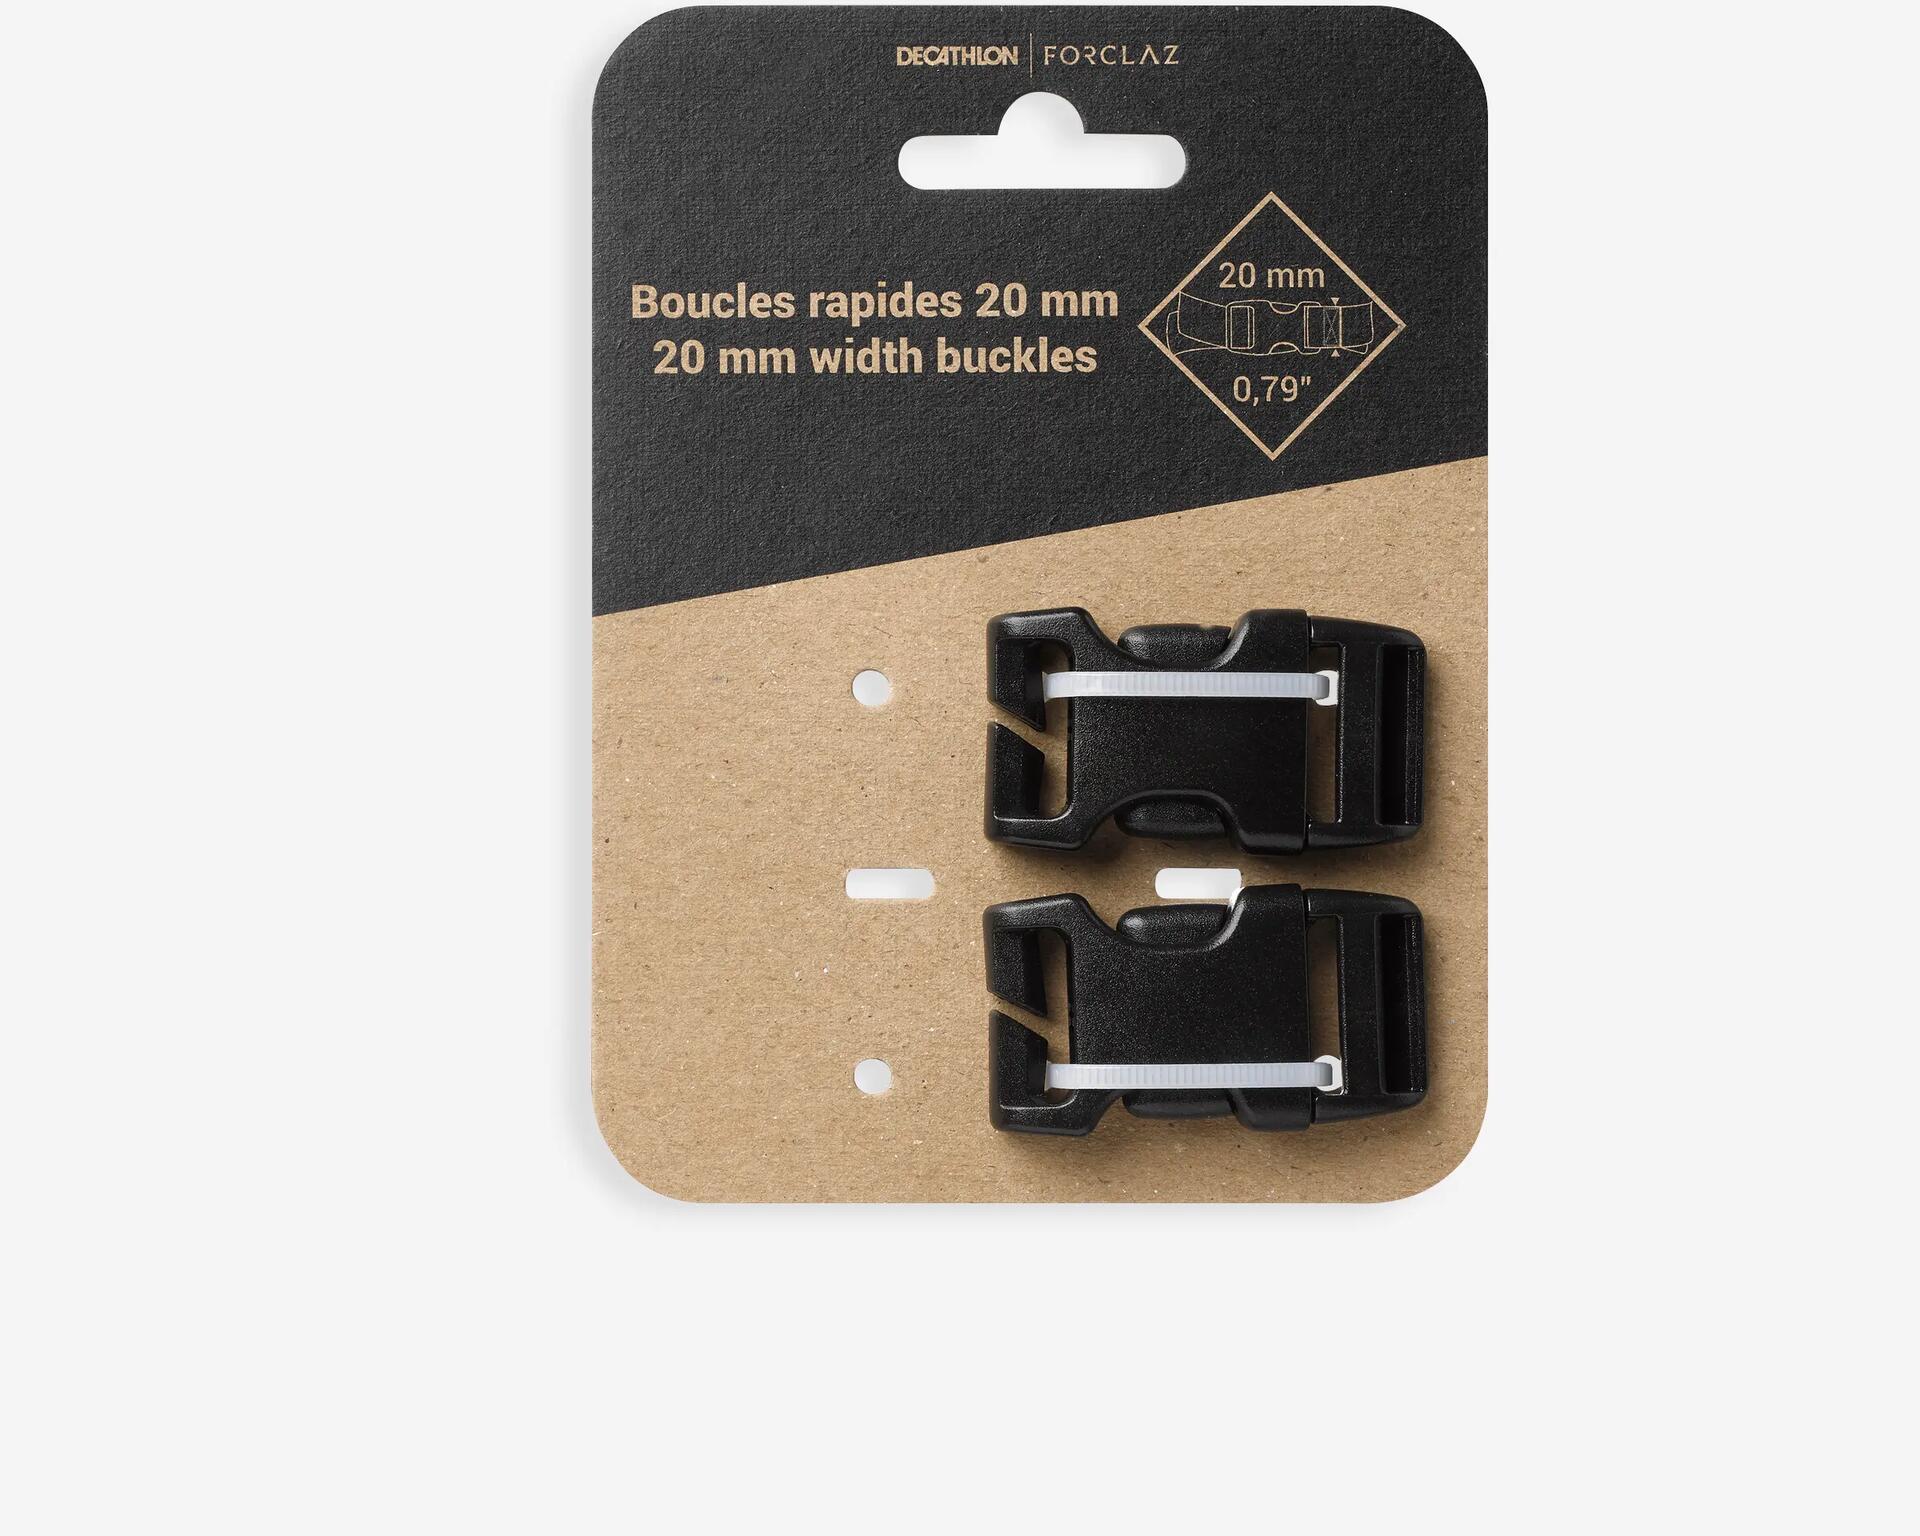 2 x 20 mm quick-release buckles backpack